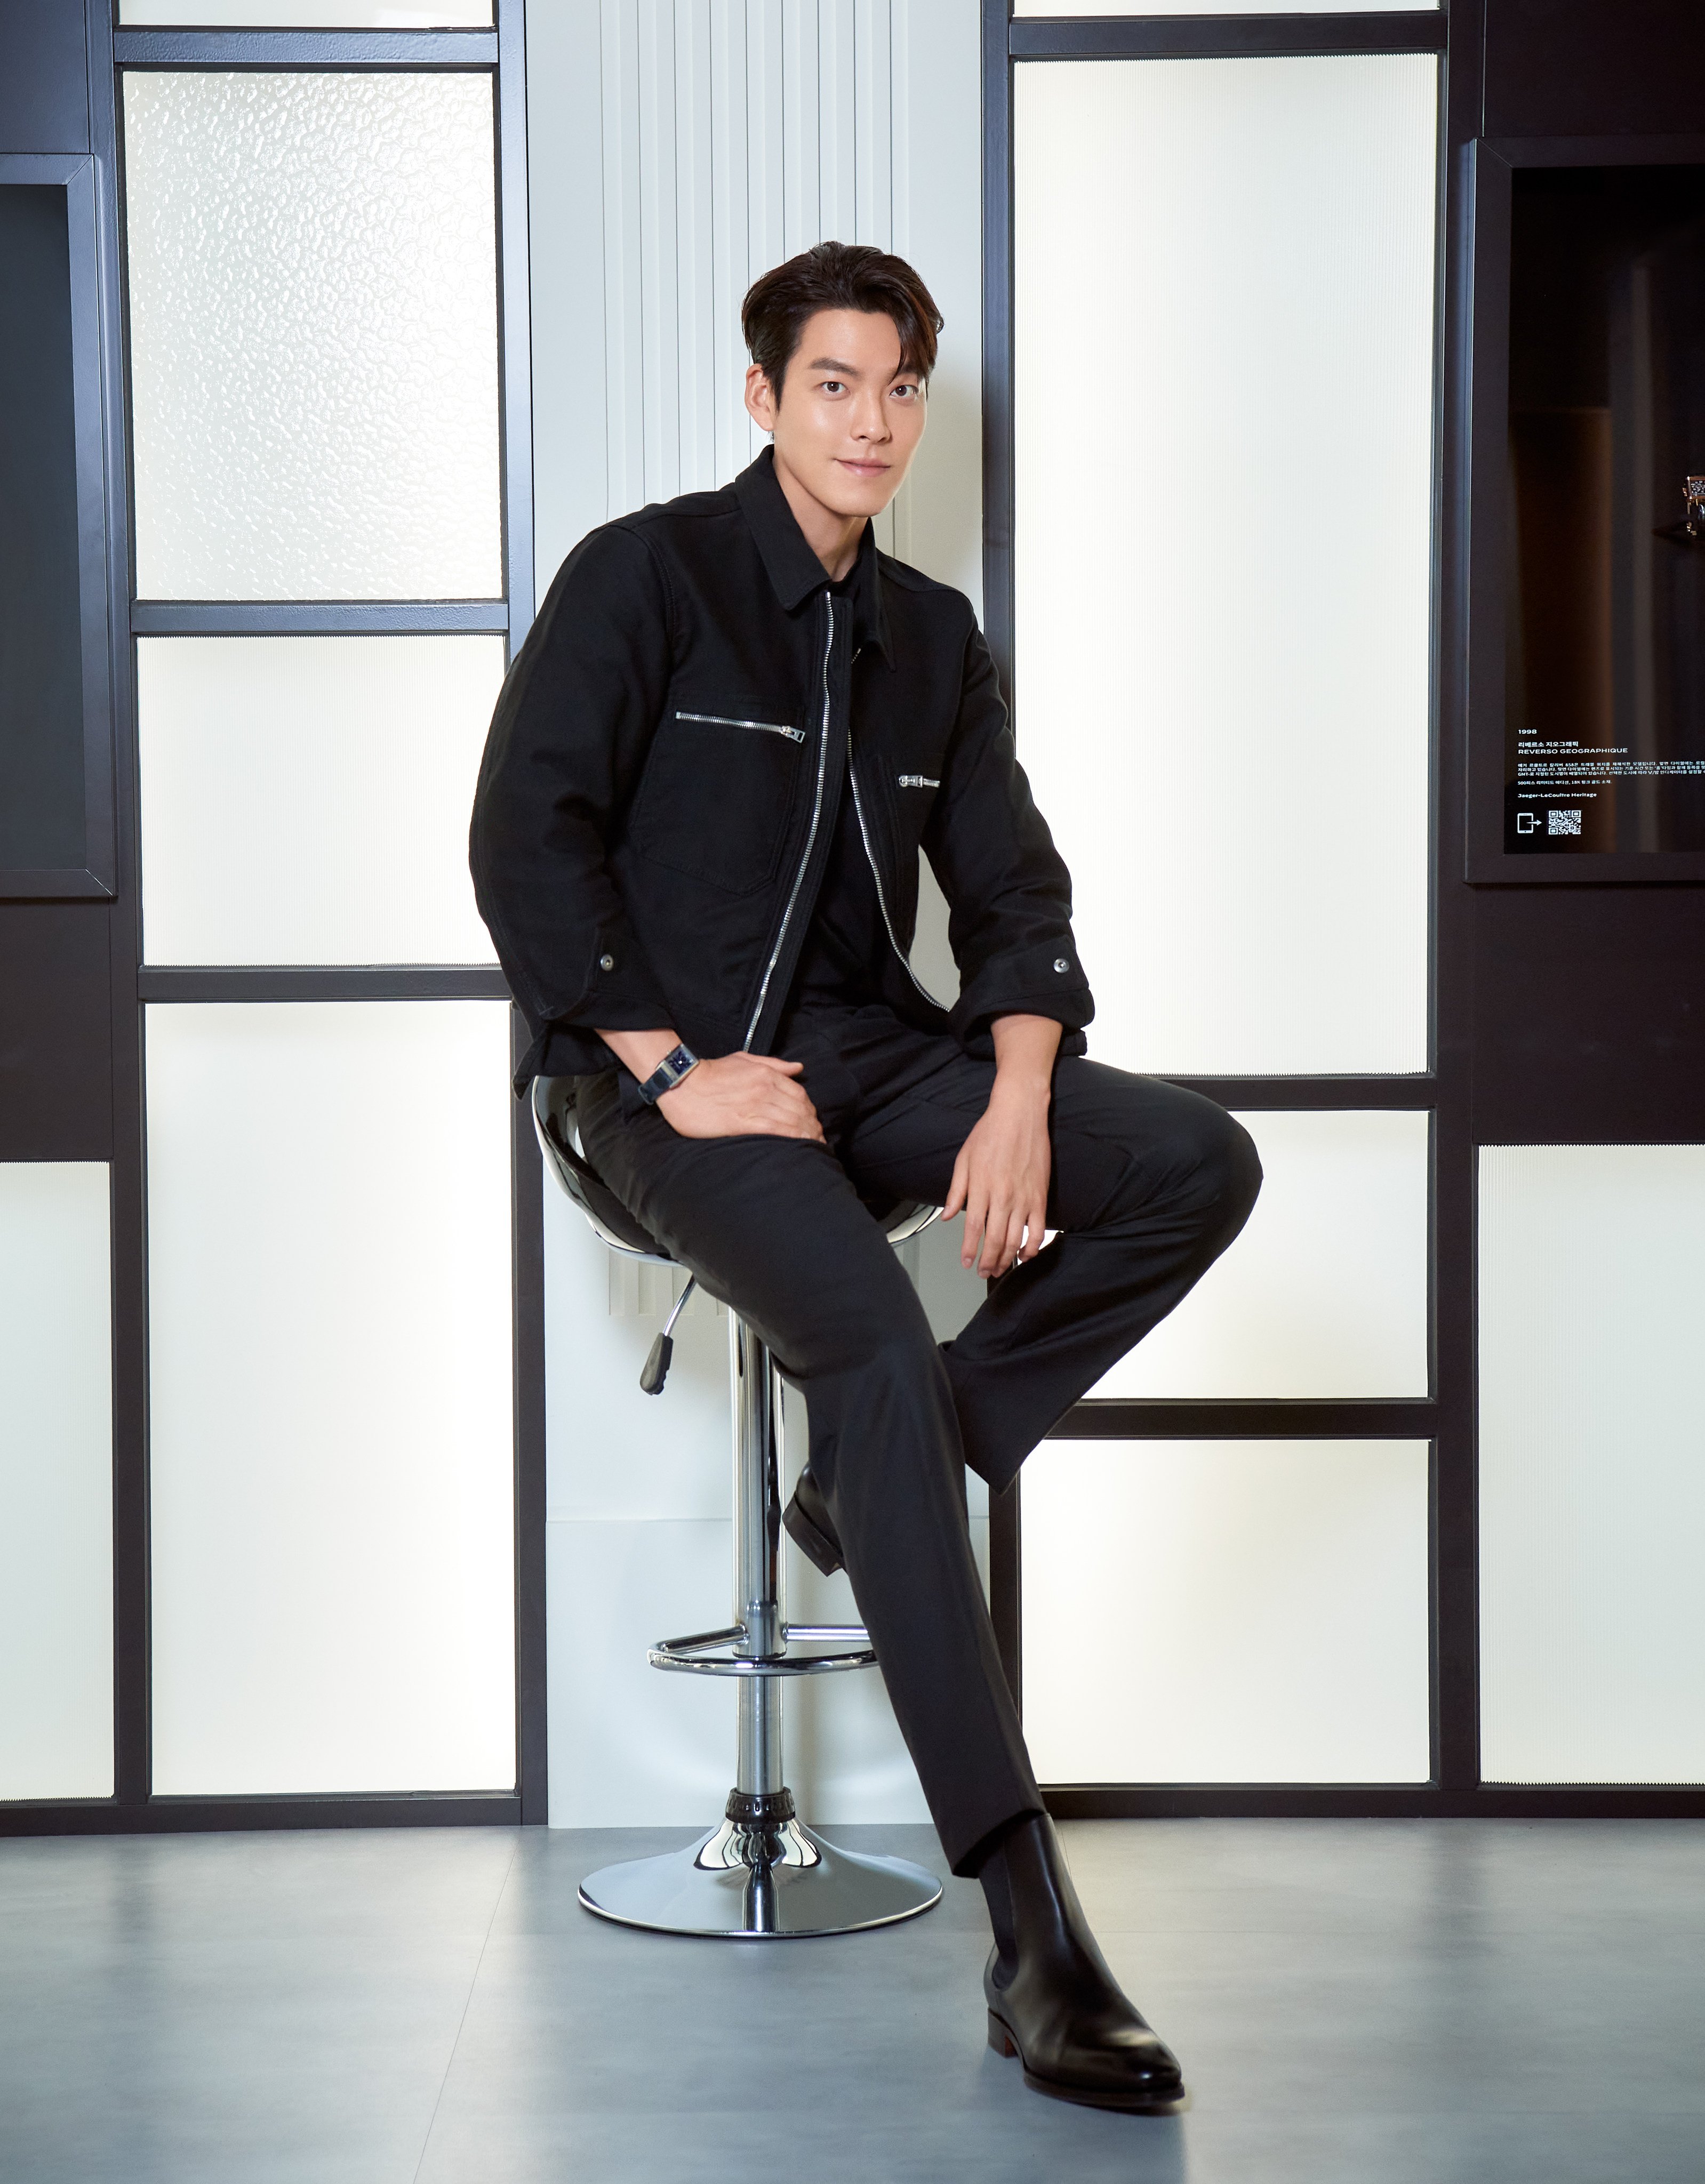 K-drama actor Kim Woo-bin is back on the big screen – and has also been named an ambassador of watch brand Jaeger-LeCoultre. Photo: Handout